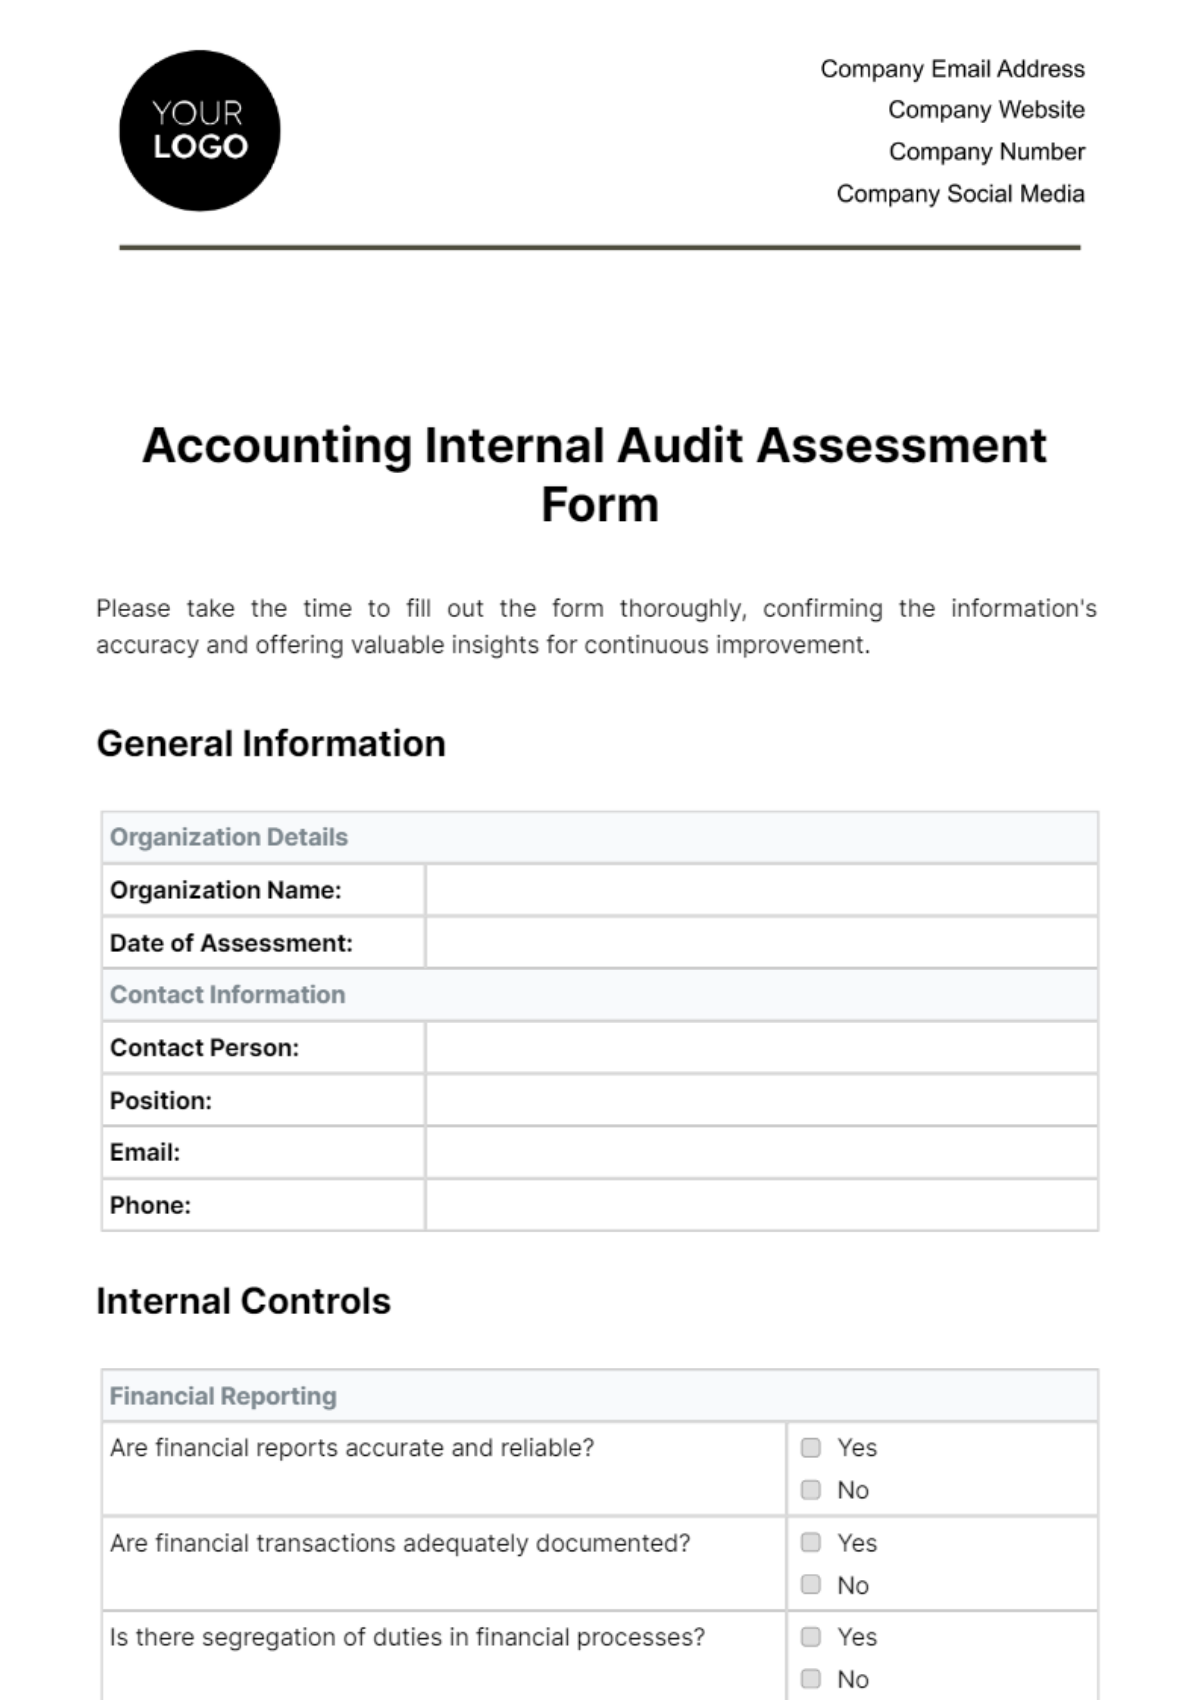 Accounting Internal Audit Assessment Form Template